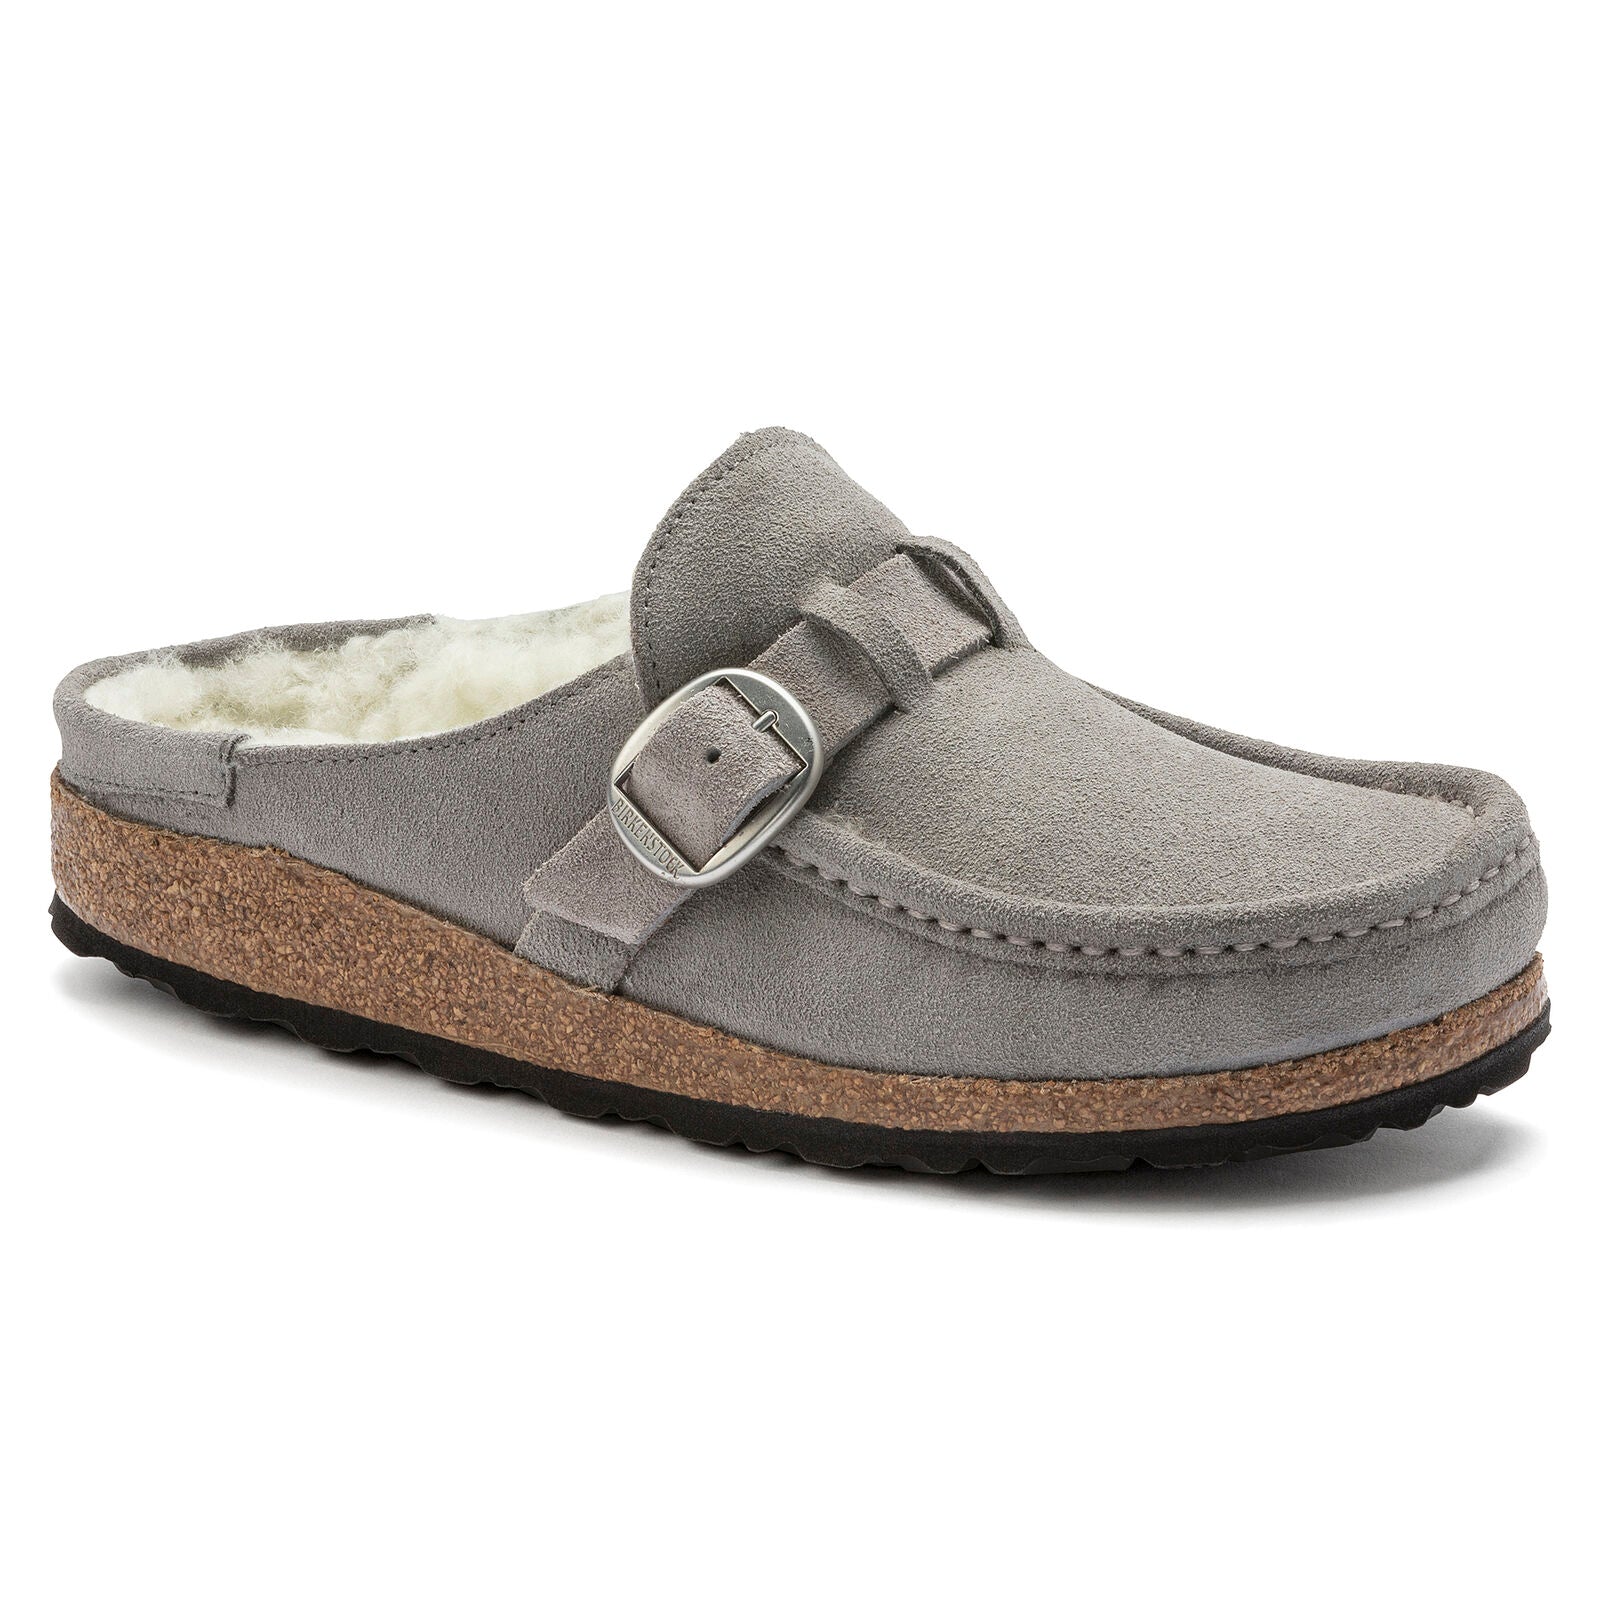 BIRKENSTOCK BUCKLEY SHEARLING SUEDE LEATHER | STONE COIN